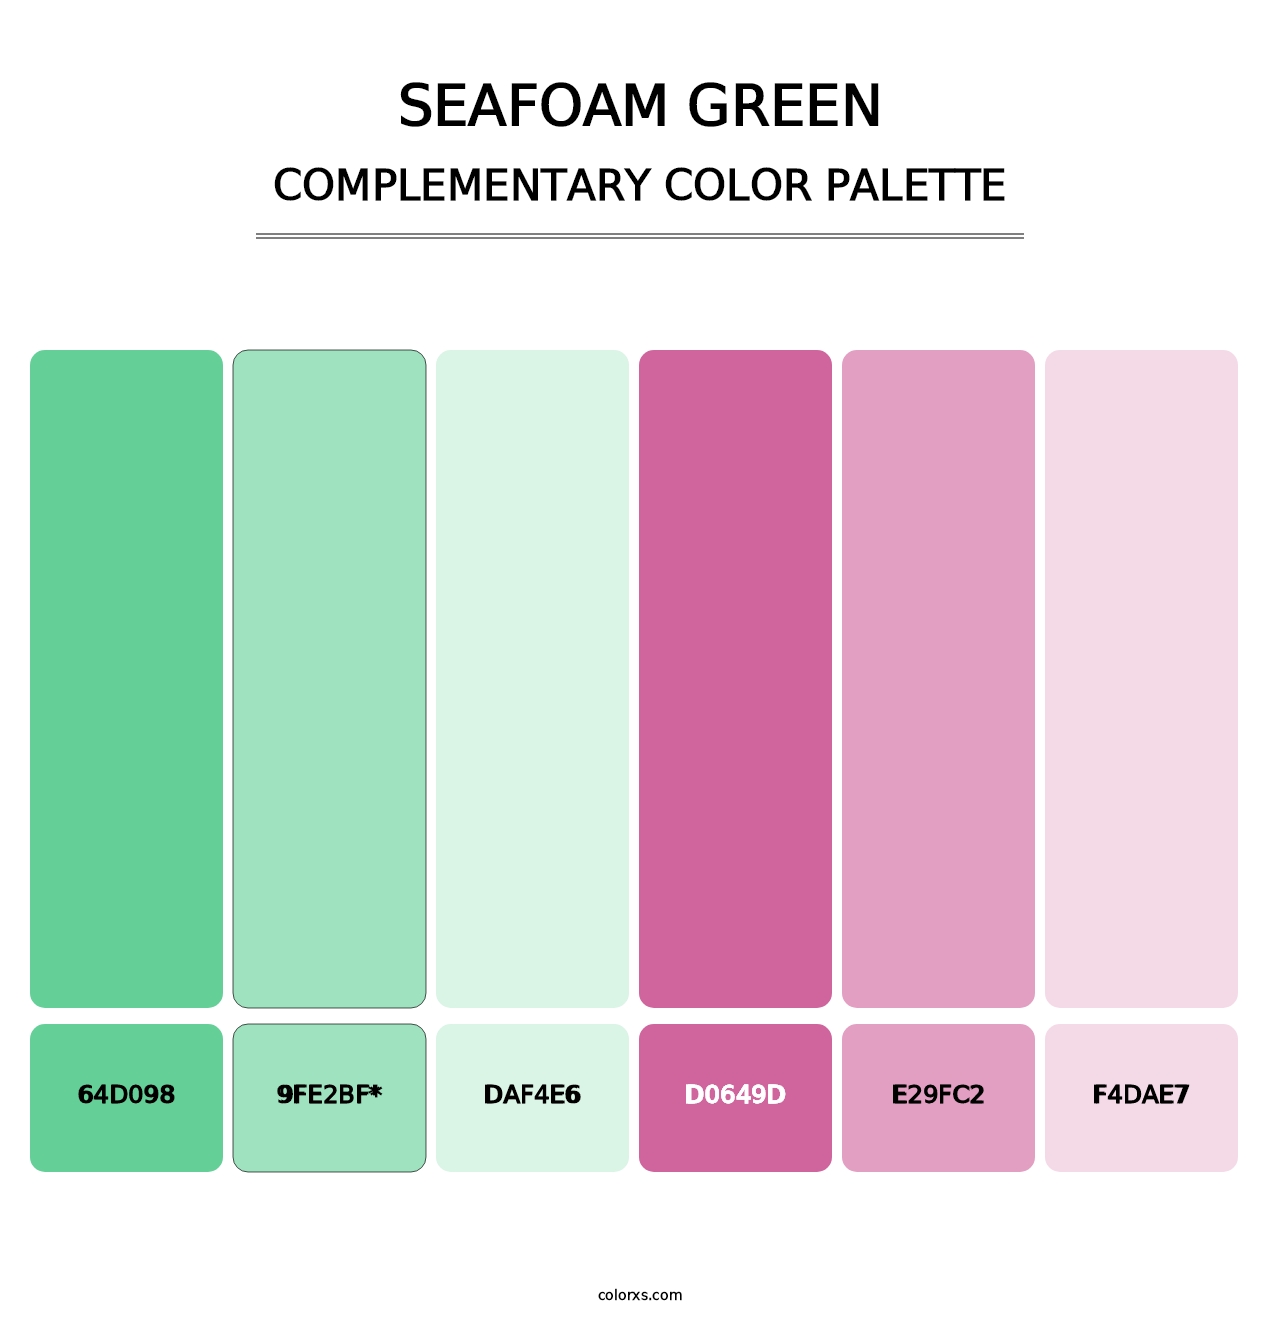 Seafoam Green - Complementary Color Palette